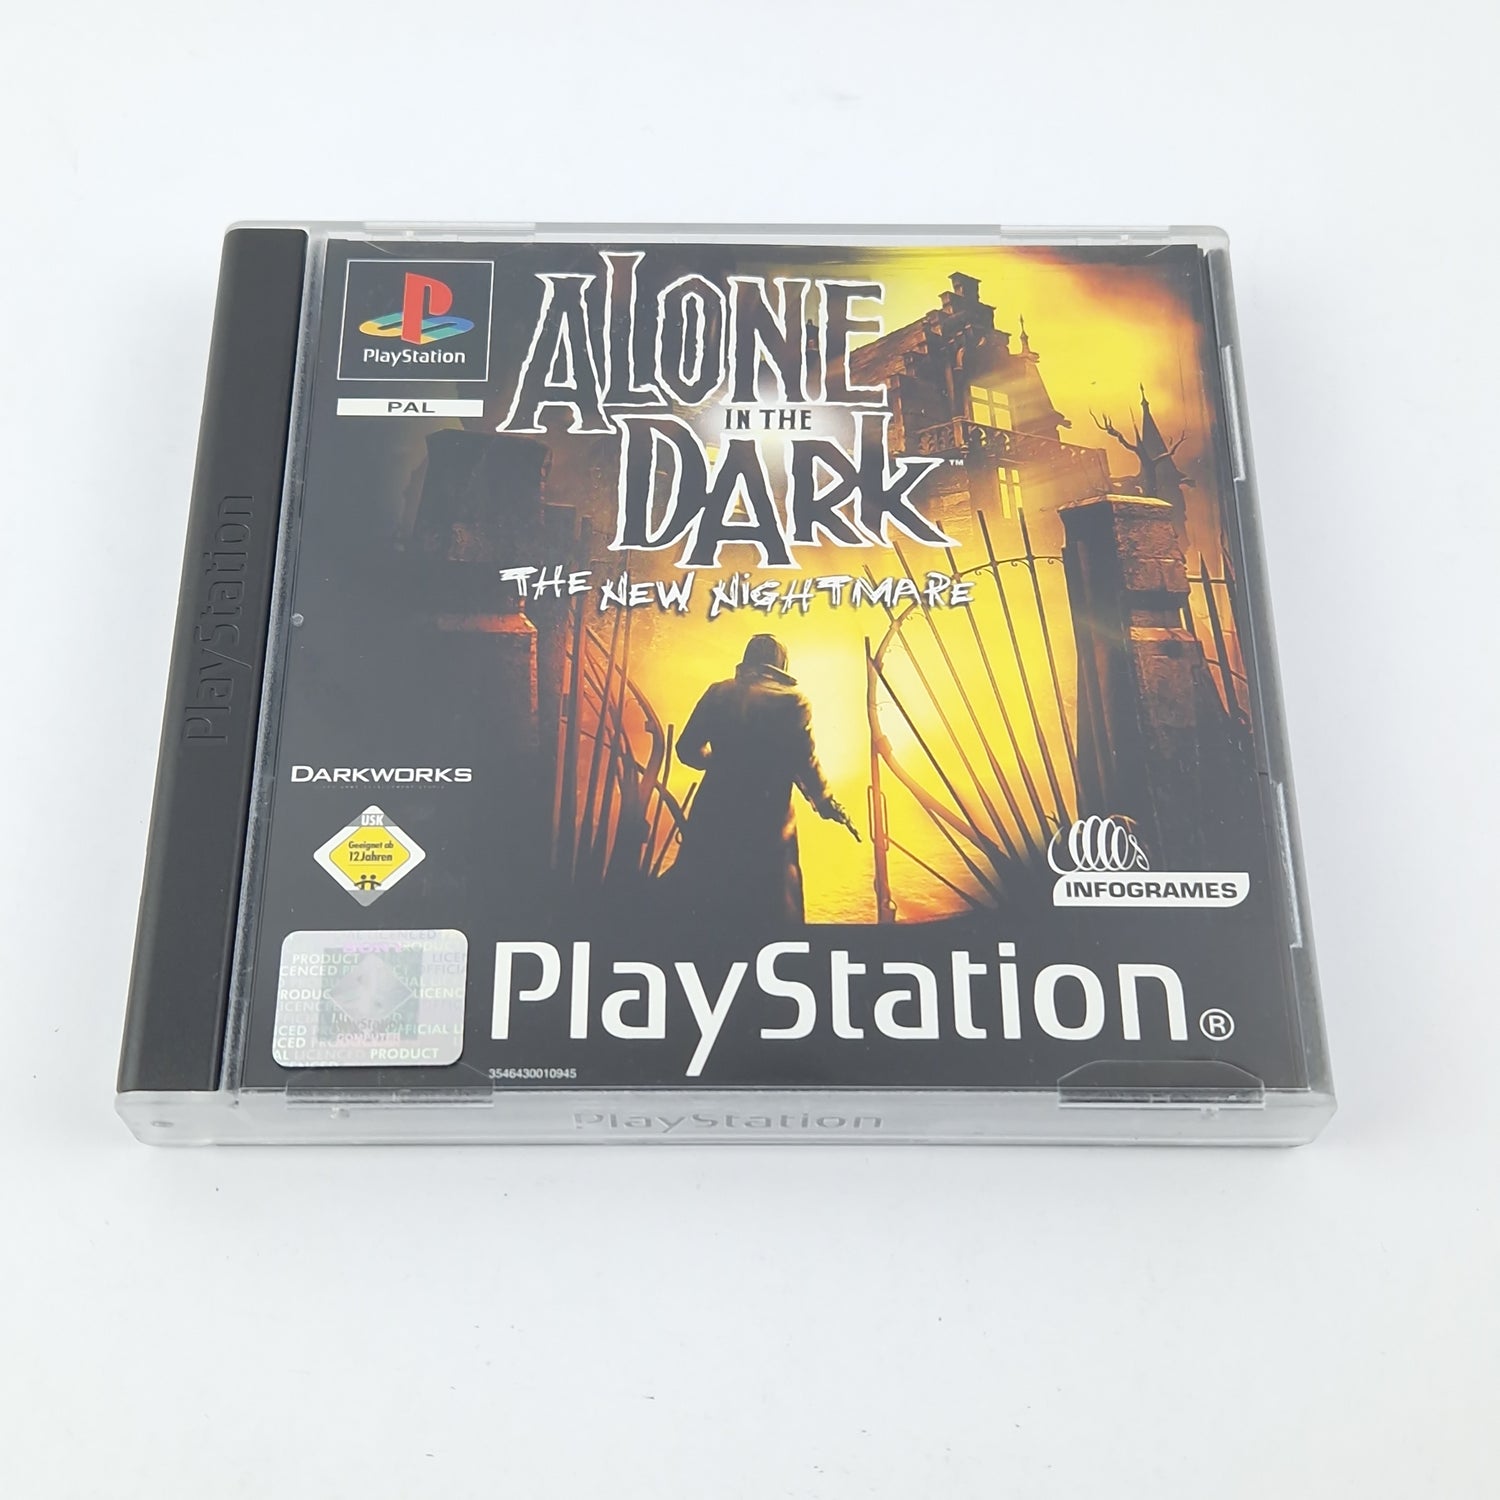 Playstation 1 Spiel : Alone in the Dark - OVP Anleitung CD / SONY PS1 PSX PAL